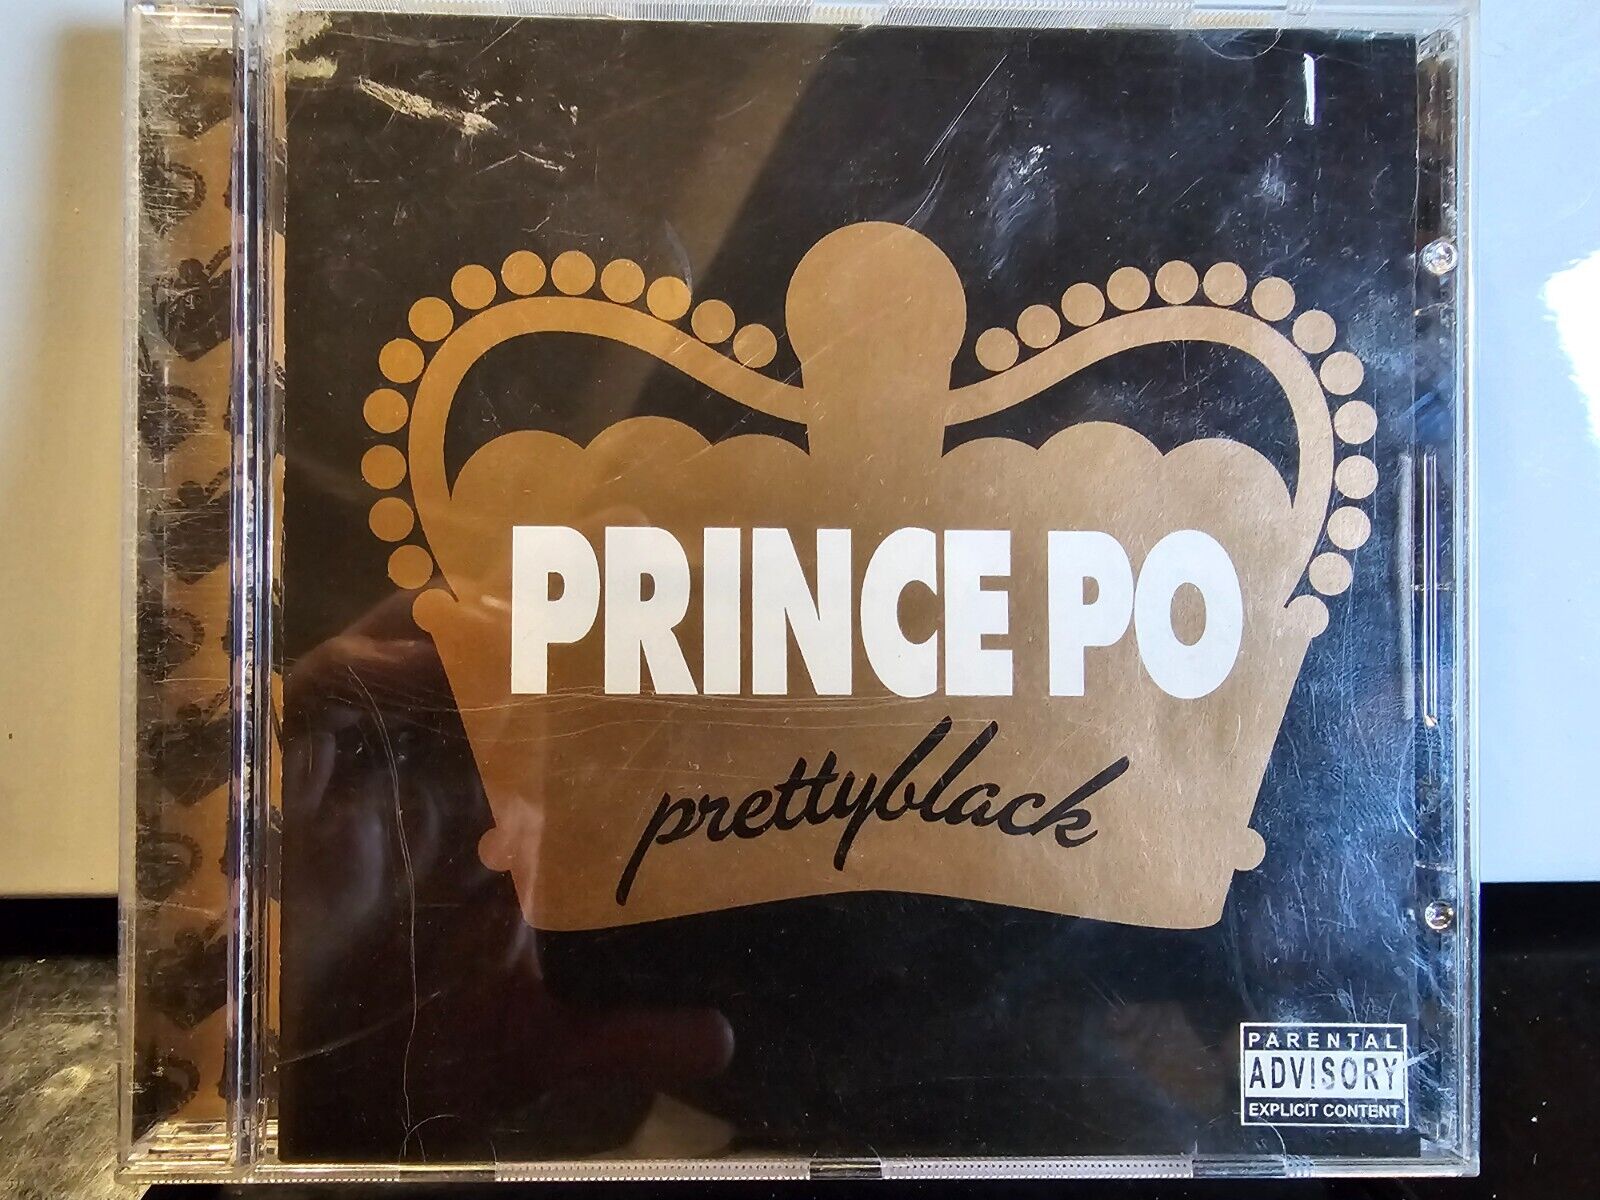 Prettyblack by Prince Po (CD, Traffic Entertainment Group)